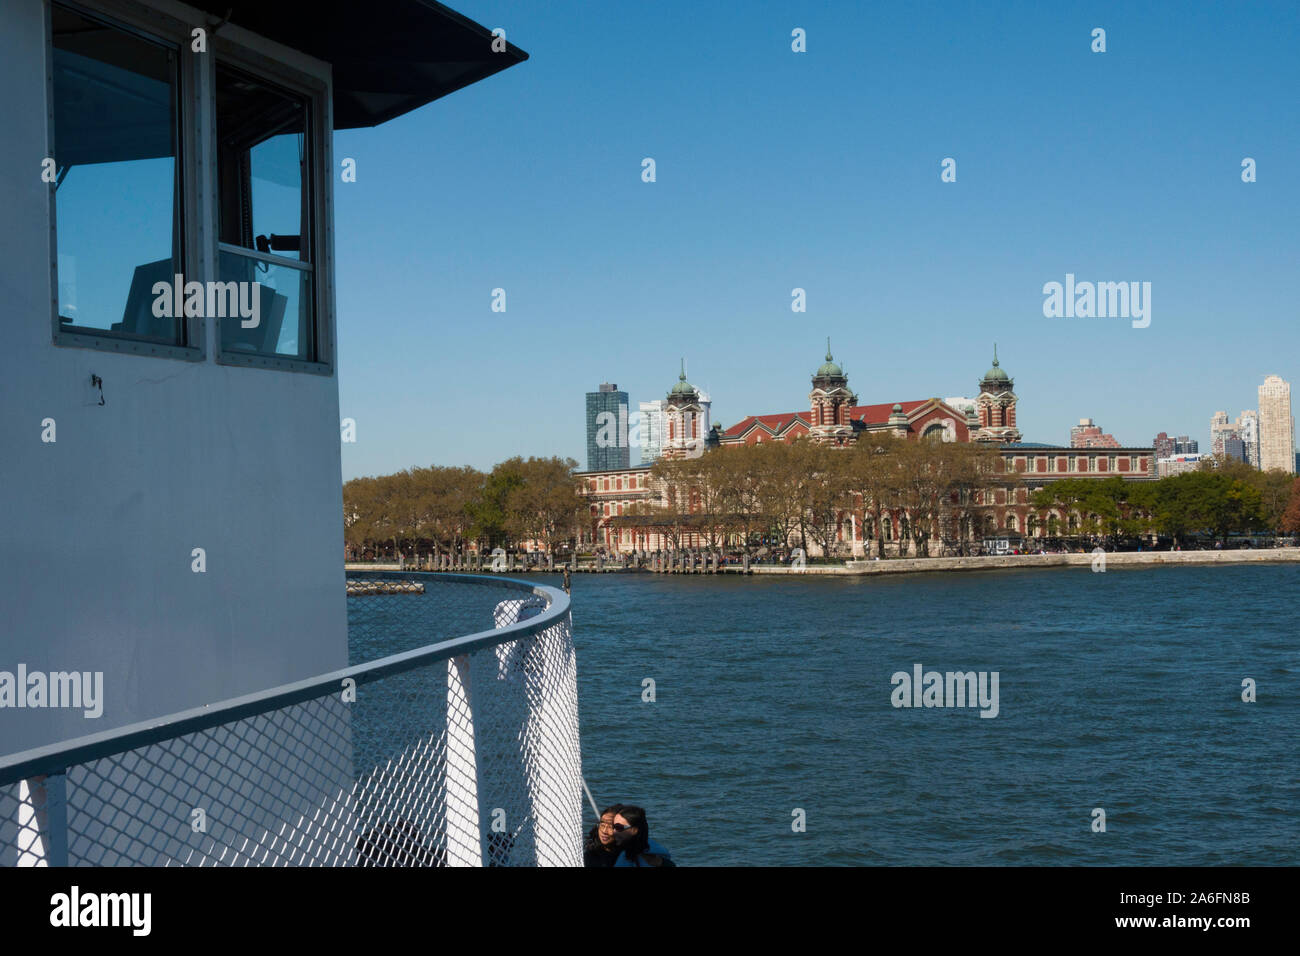 Ellis Island is and historical immigration site in New York Harbor, NYC, USA Stock Photo